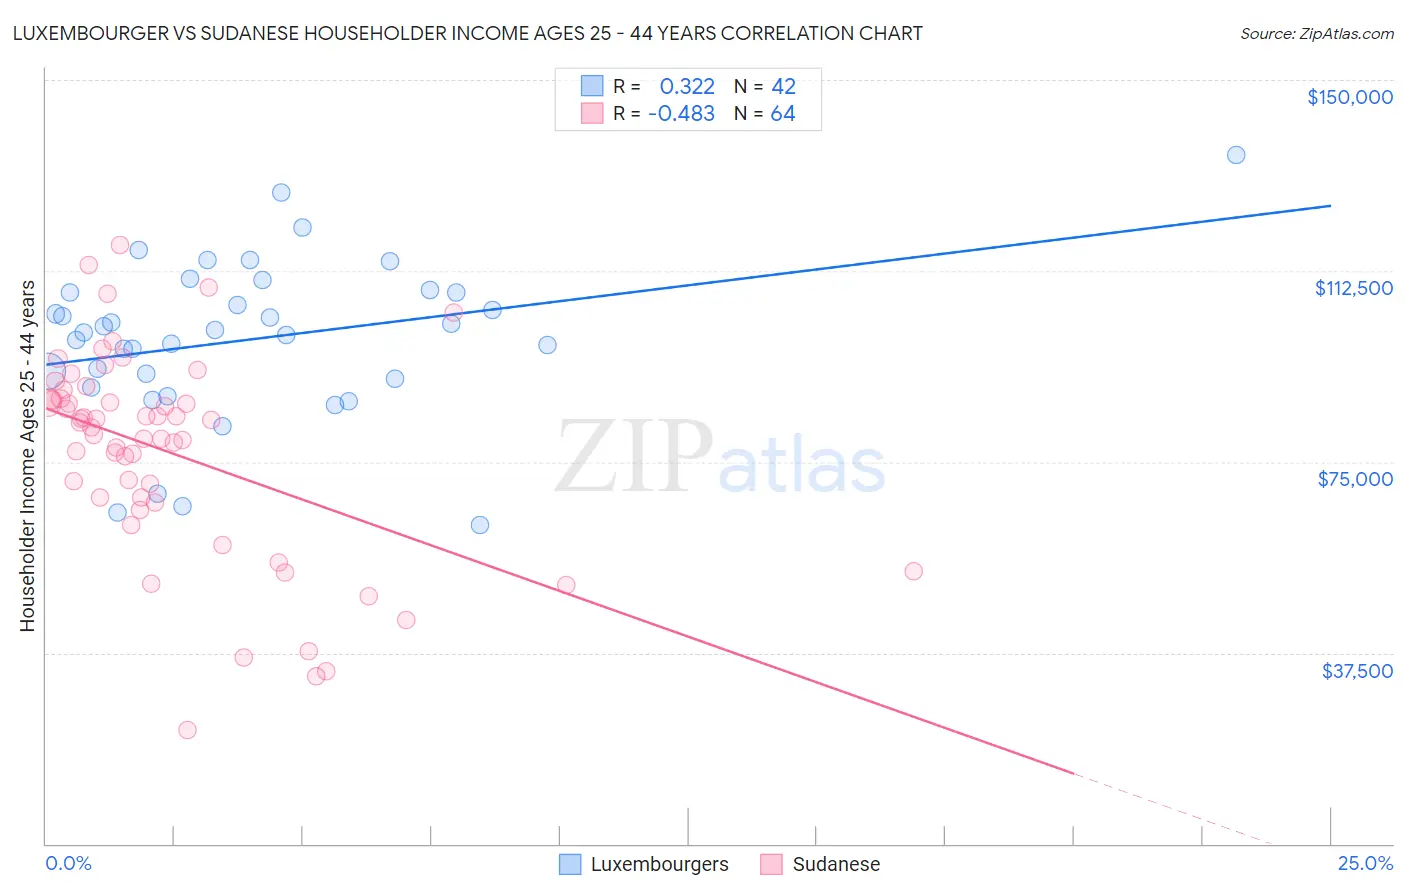 Luxembourger vs Sudanese Householder Income Ages 25 - 44 years